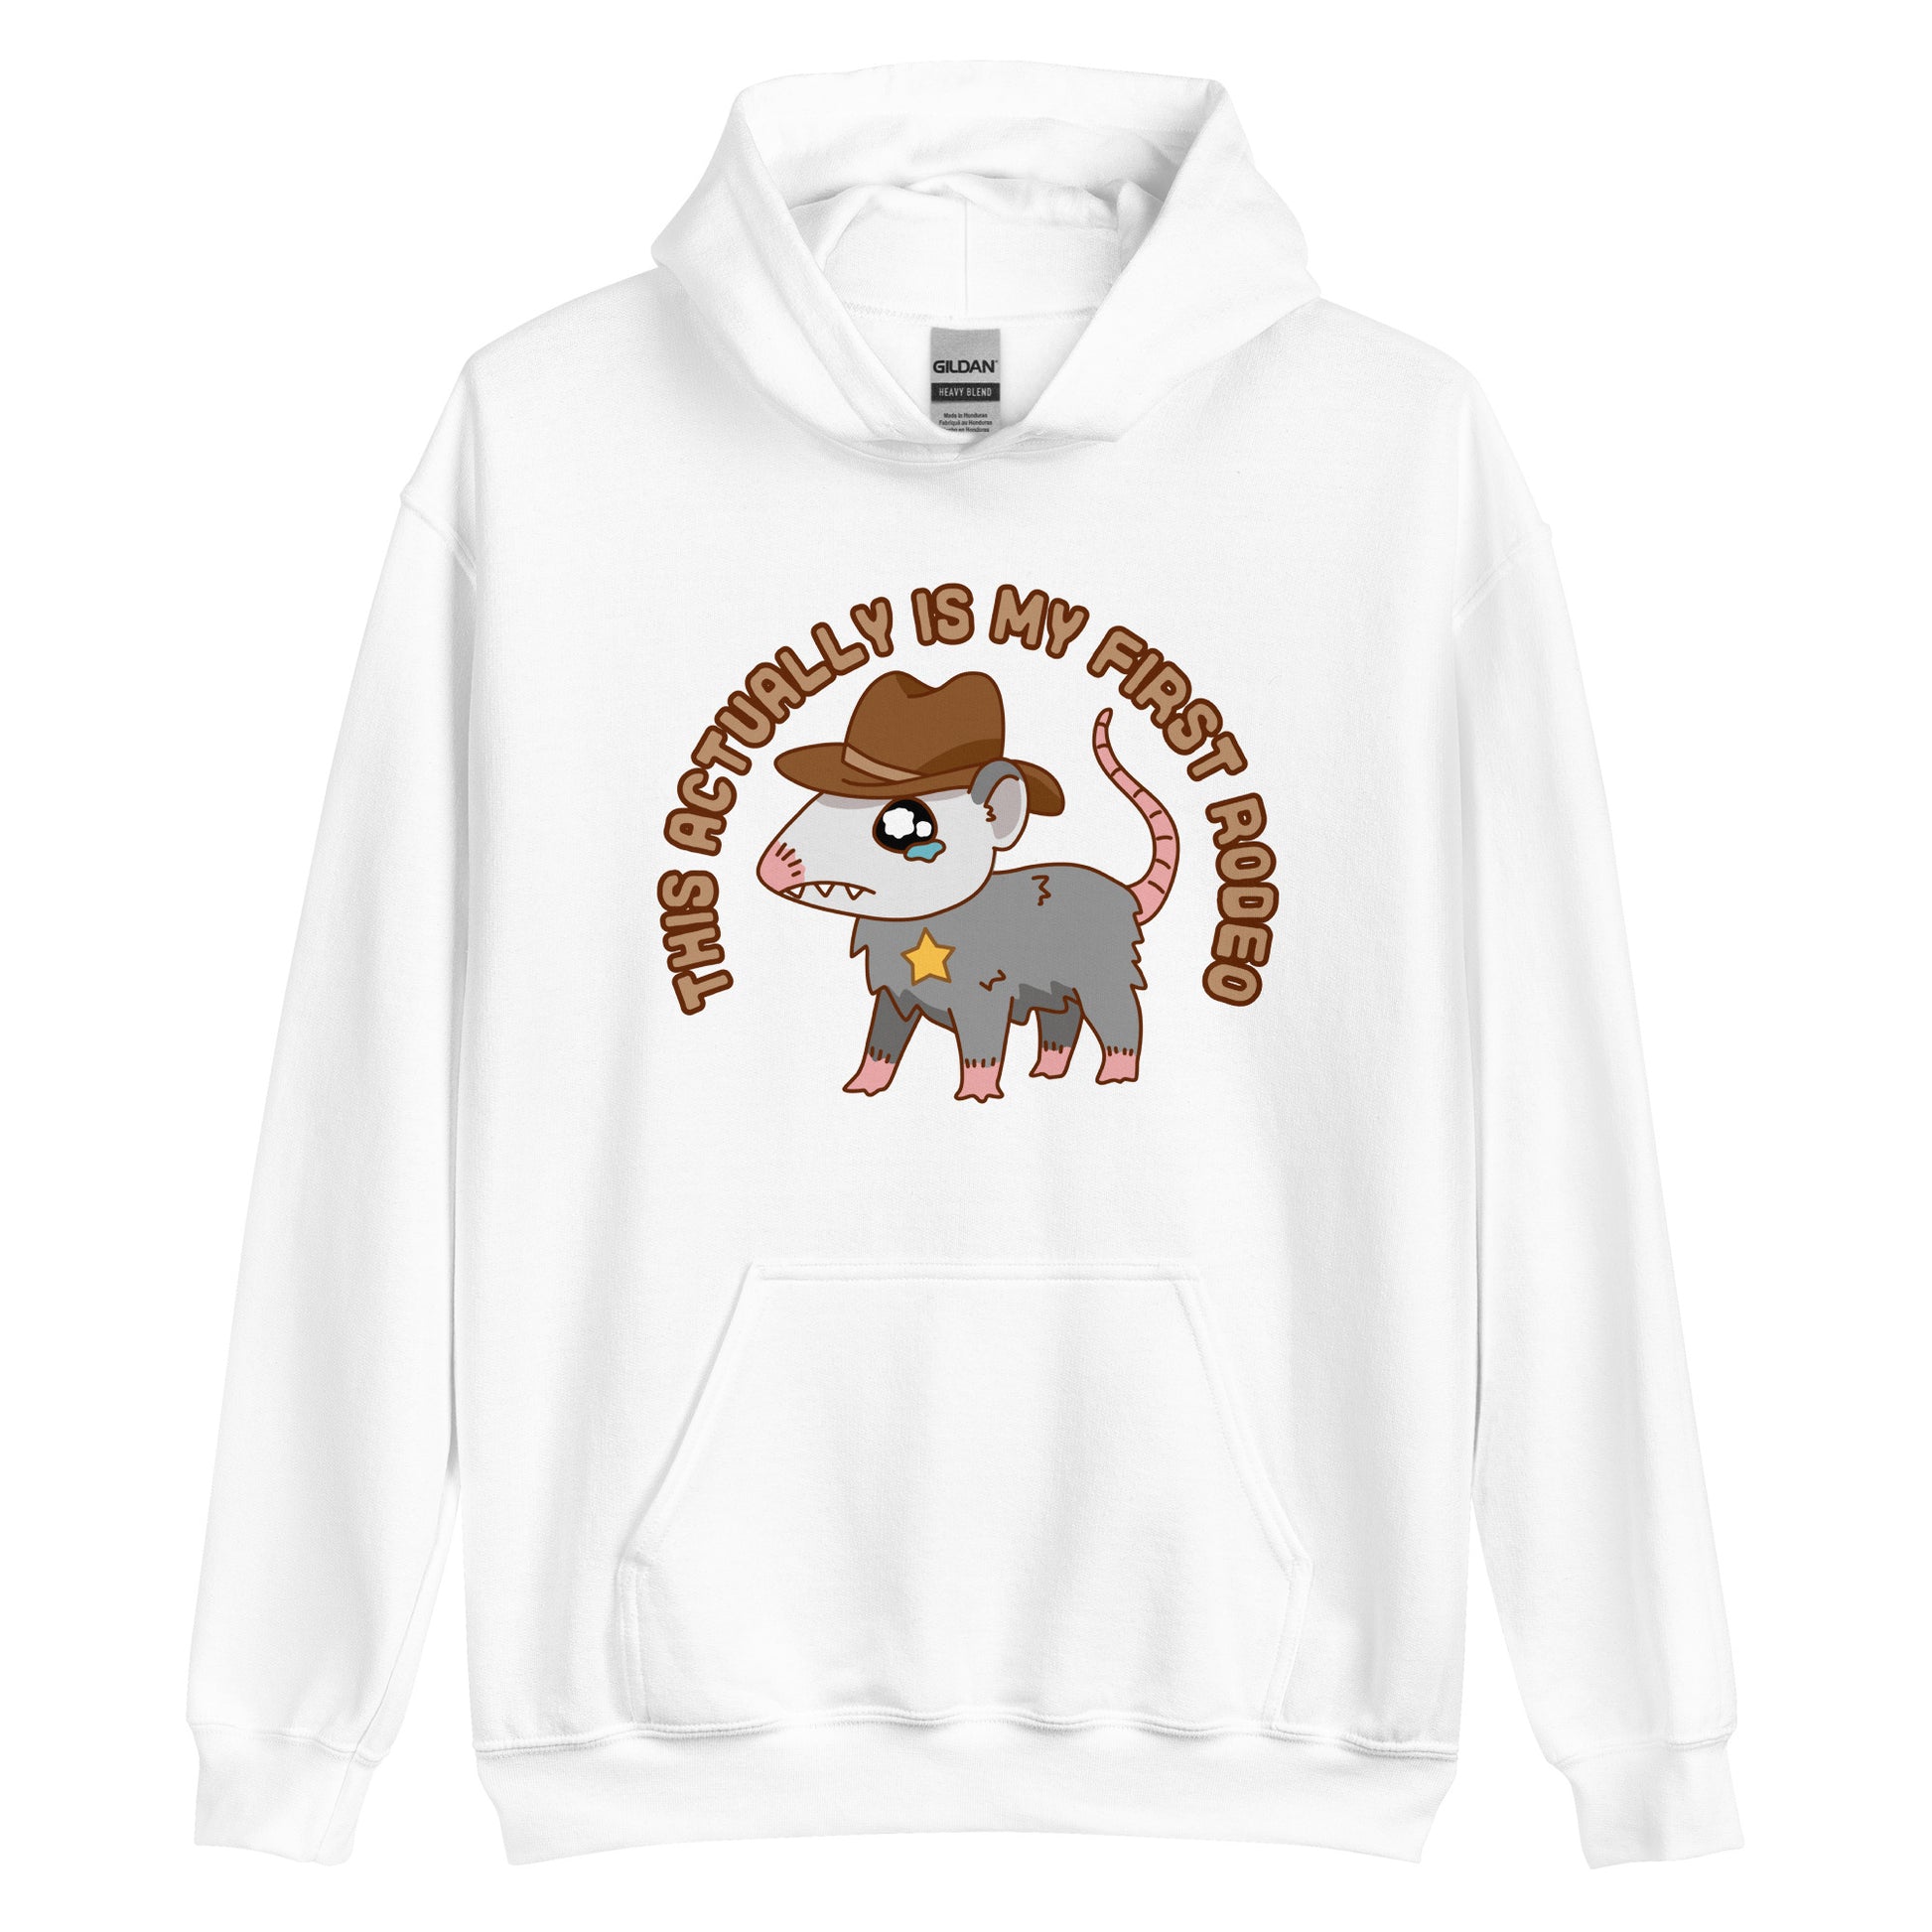 A white hooded sweatshirt featuring an illustration of a cute and nervous possum wearing a cowboy hat and sherrif's star badge. Text above the possum in an arc reads "this actually is my first rodeo".